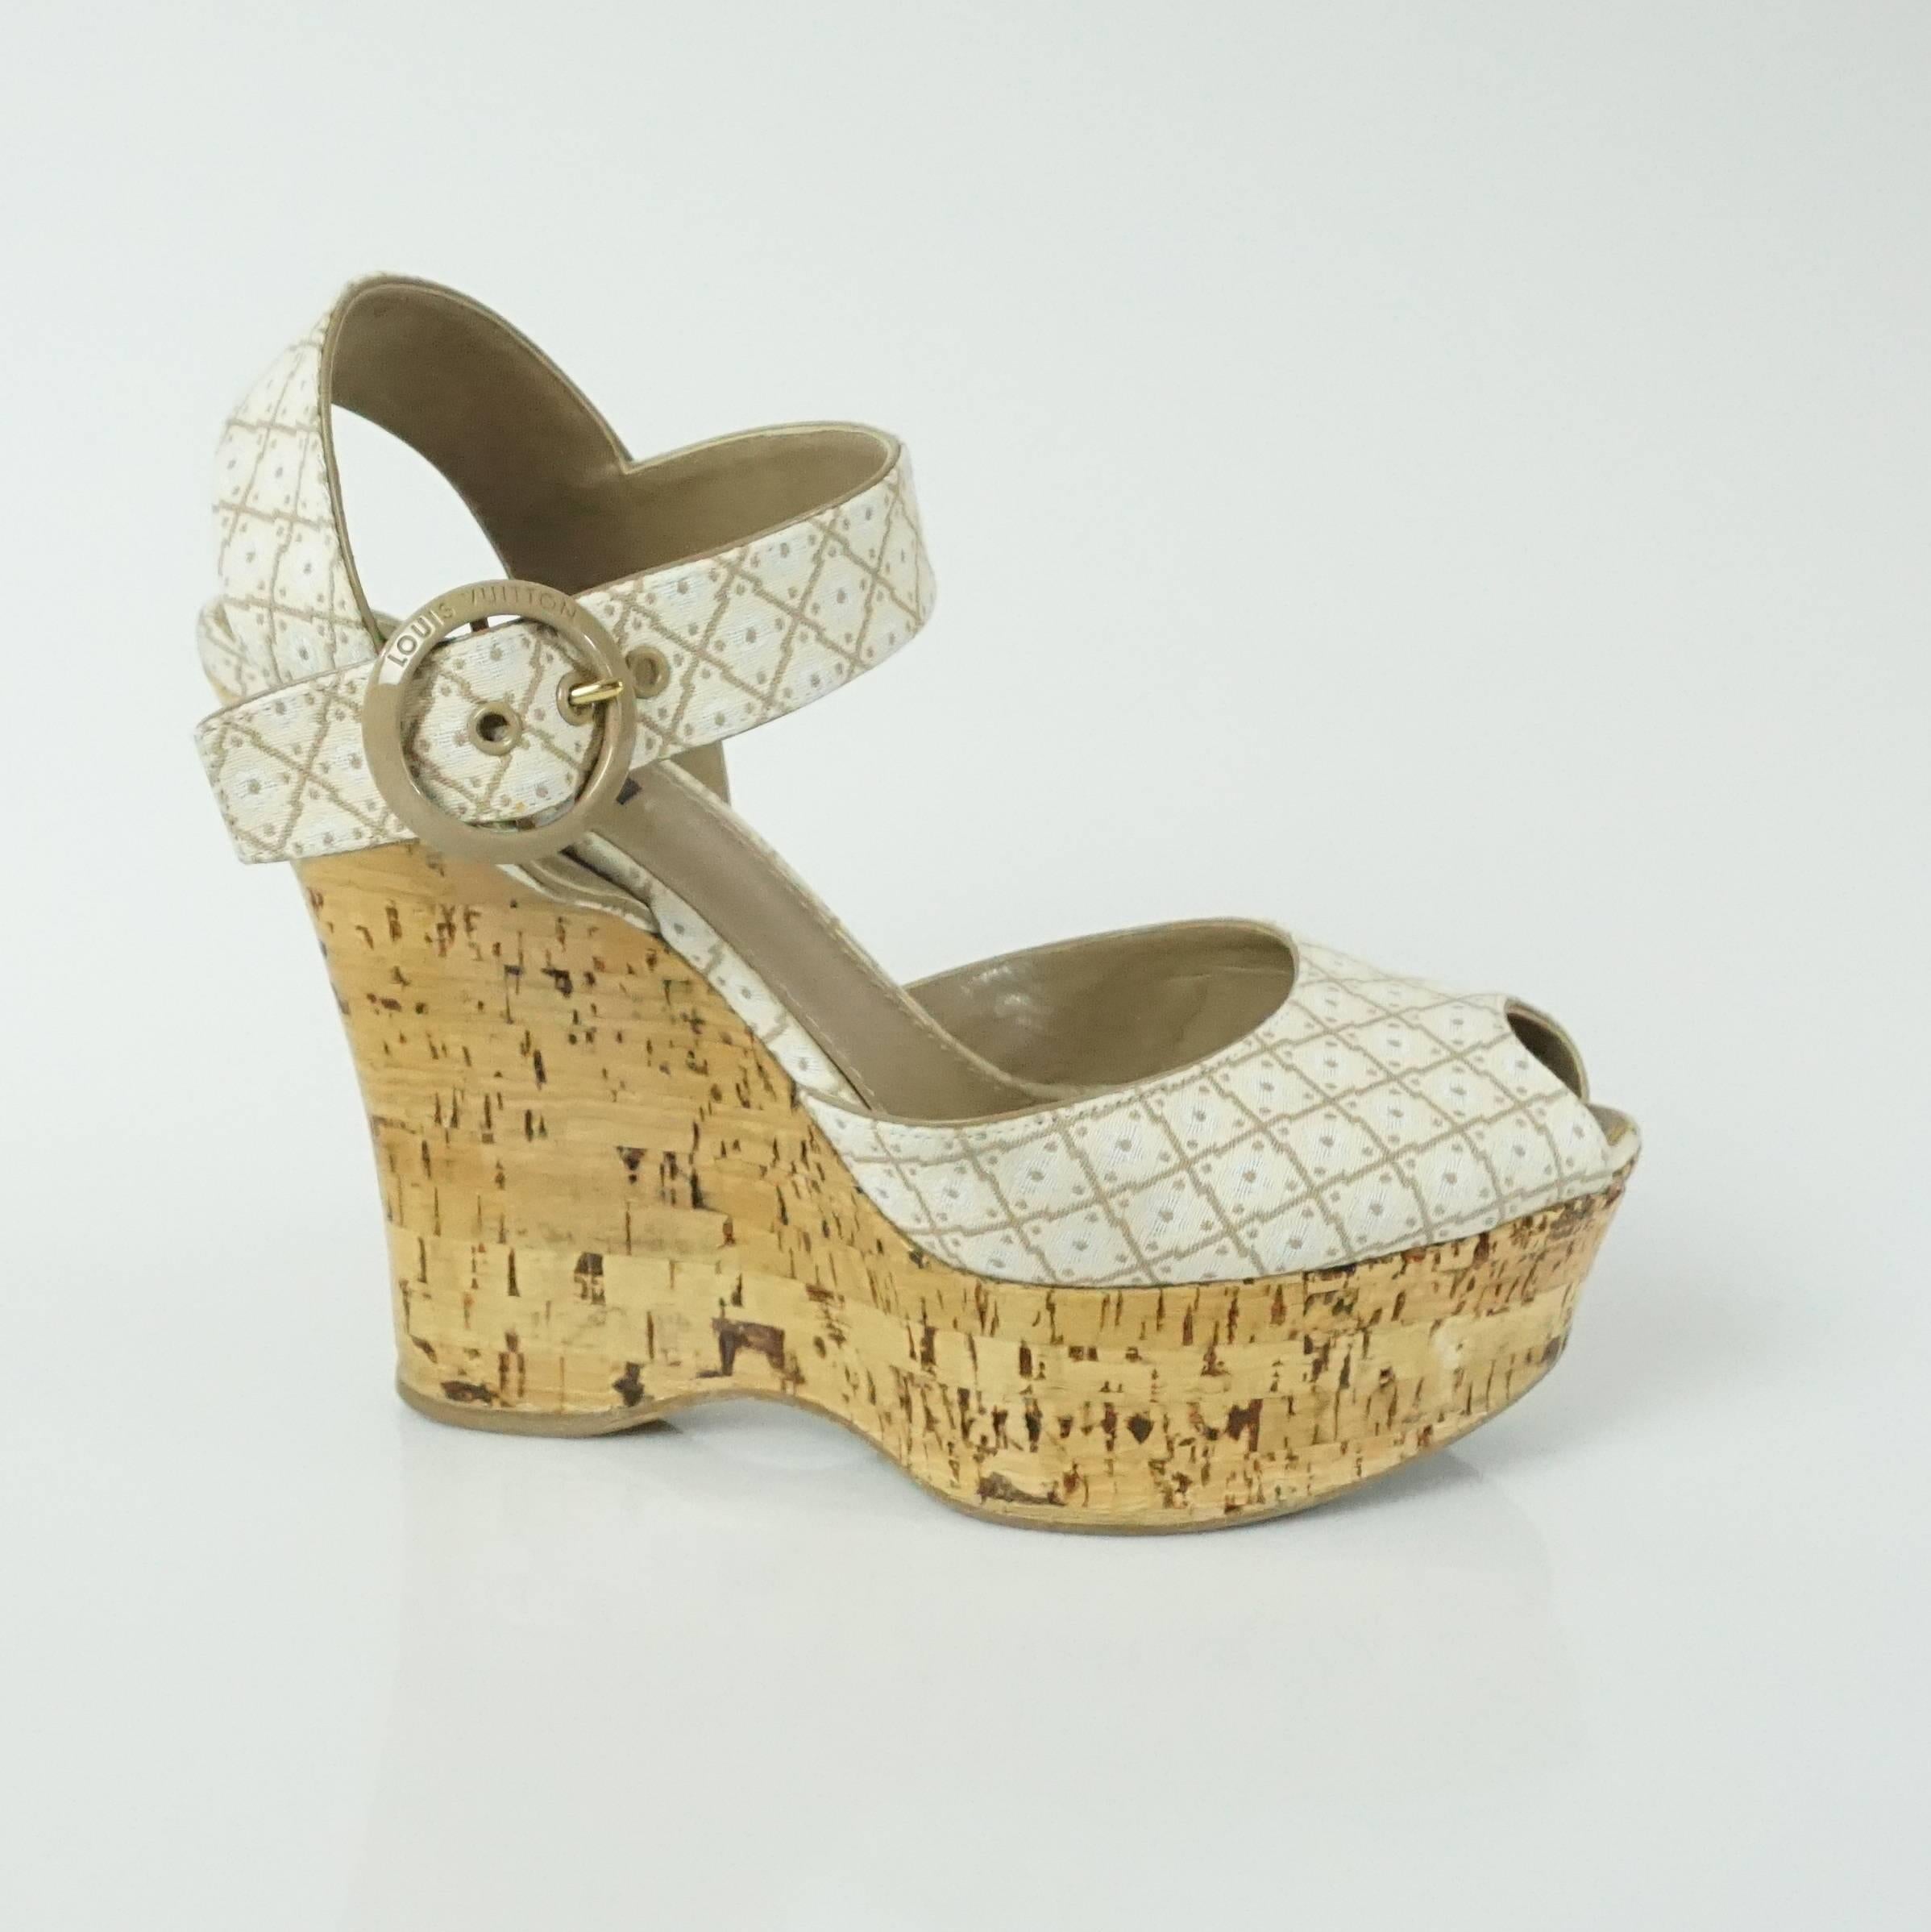 This Louis Vuitton cork wedges feature a strap on the upper part of the foot, a peep toe, and an ankle strap. They have a beige circular closure on the ankle strap with the words 